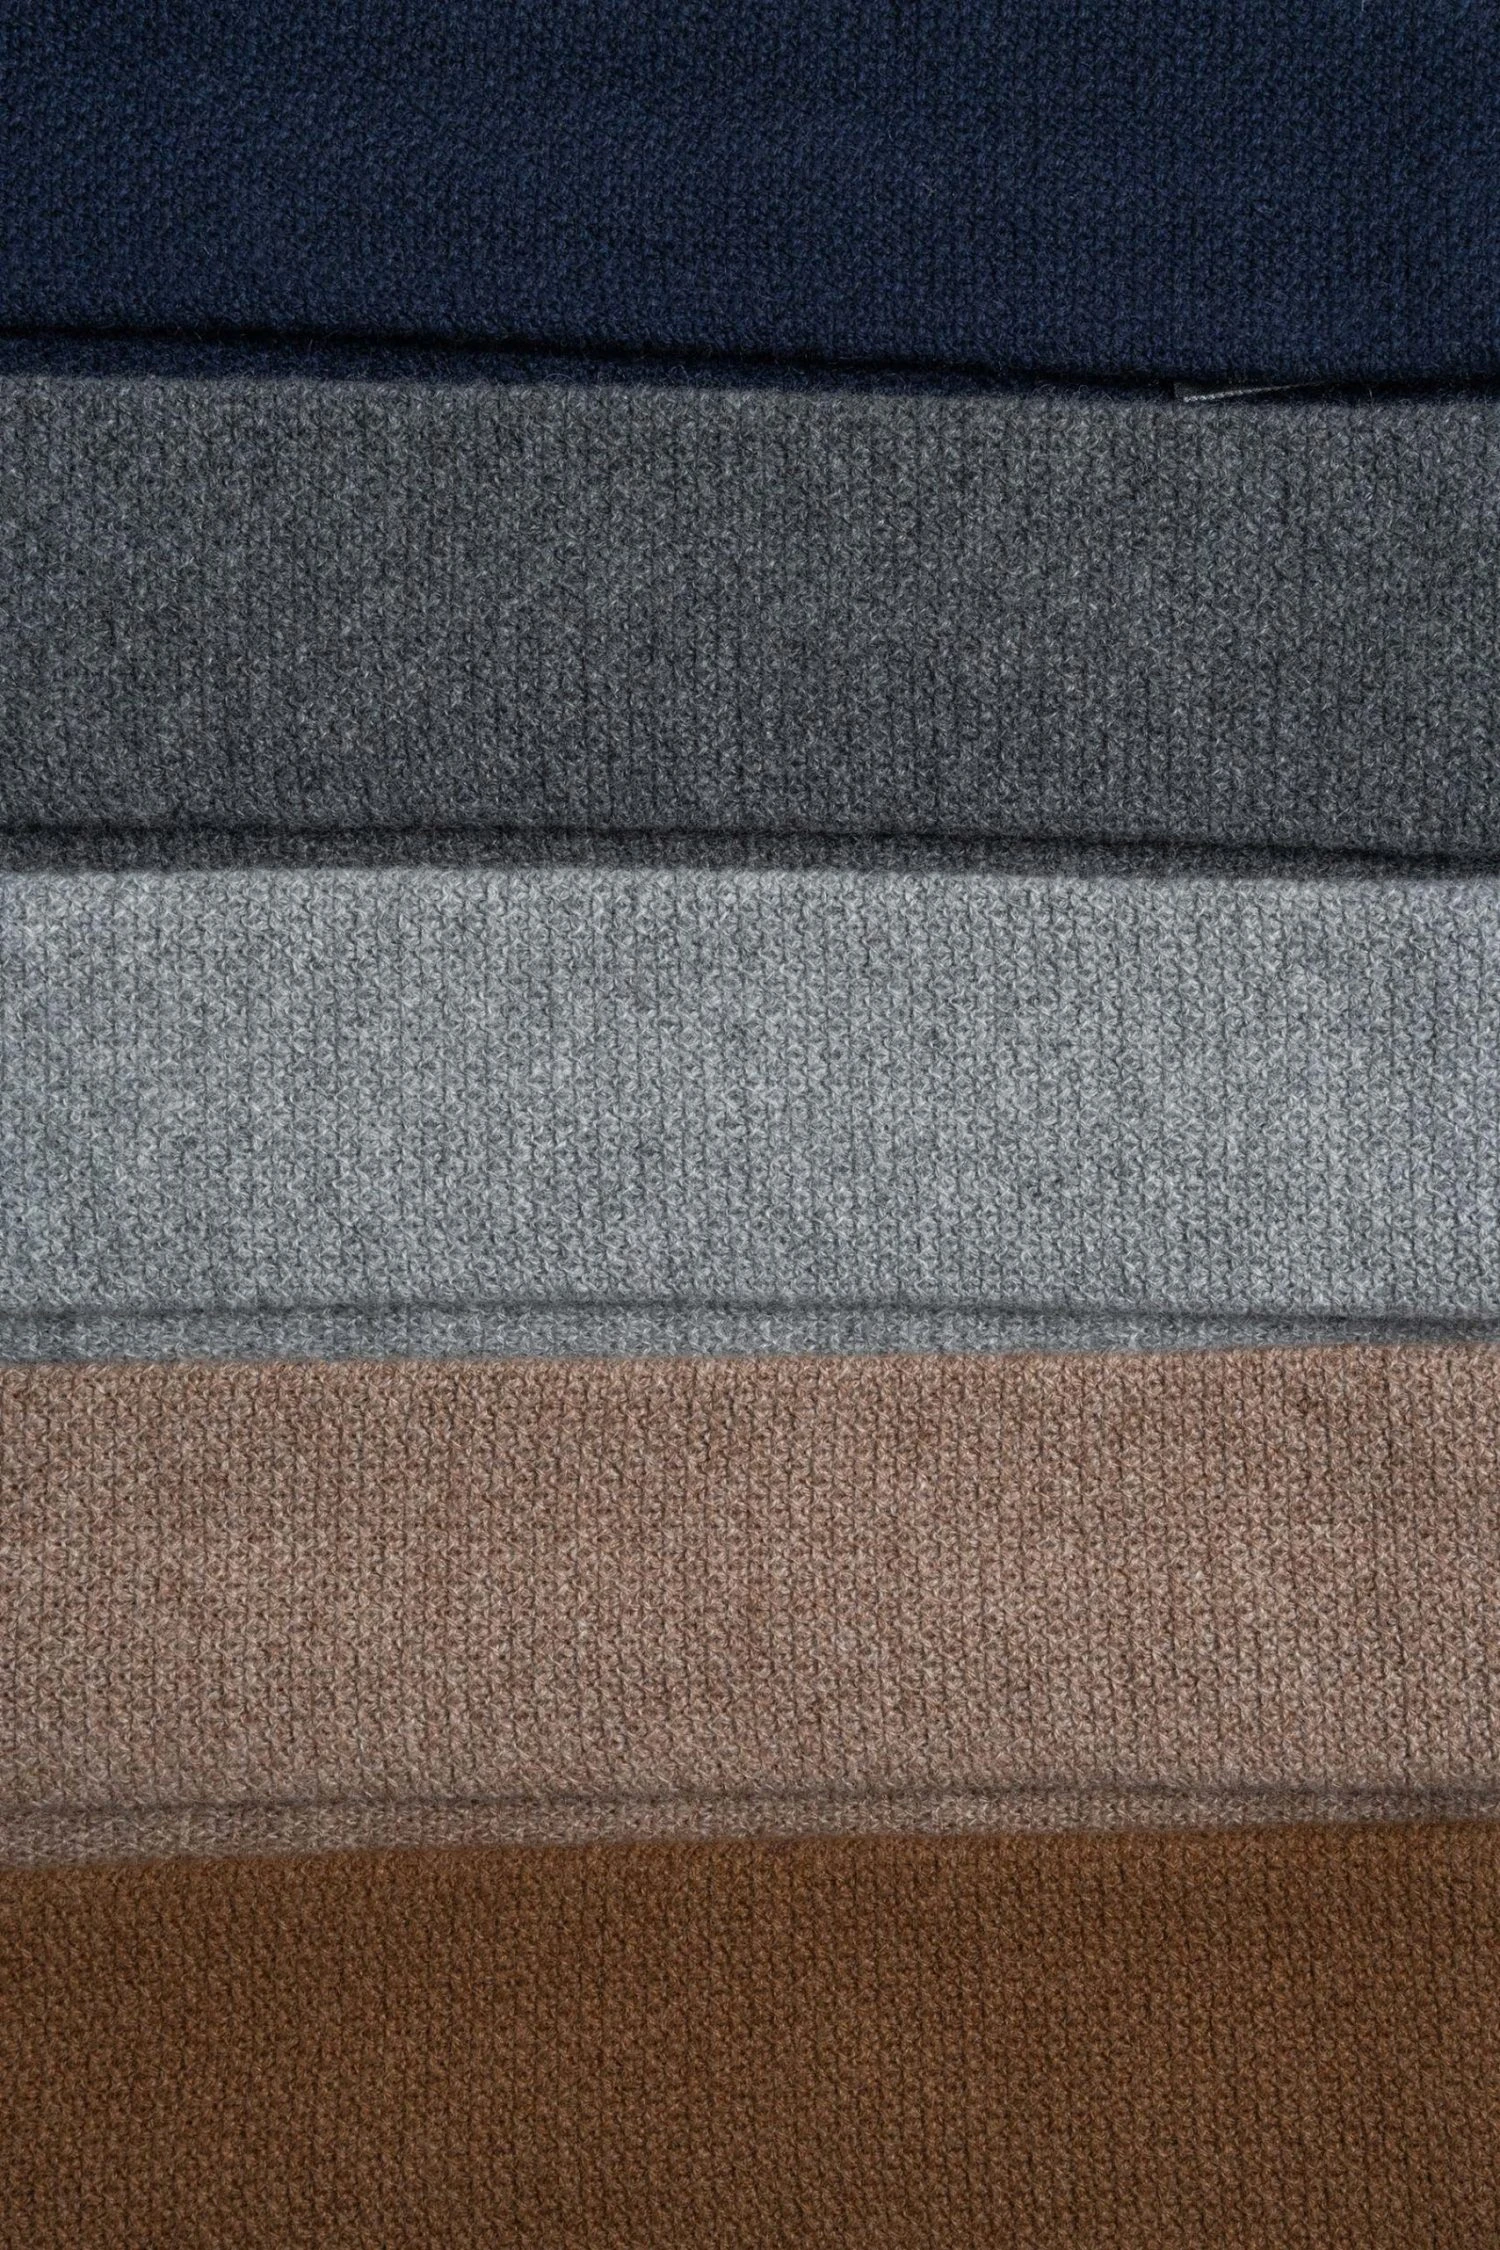 Cashmere Knit Ties by Mond